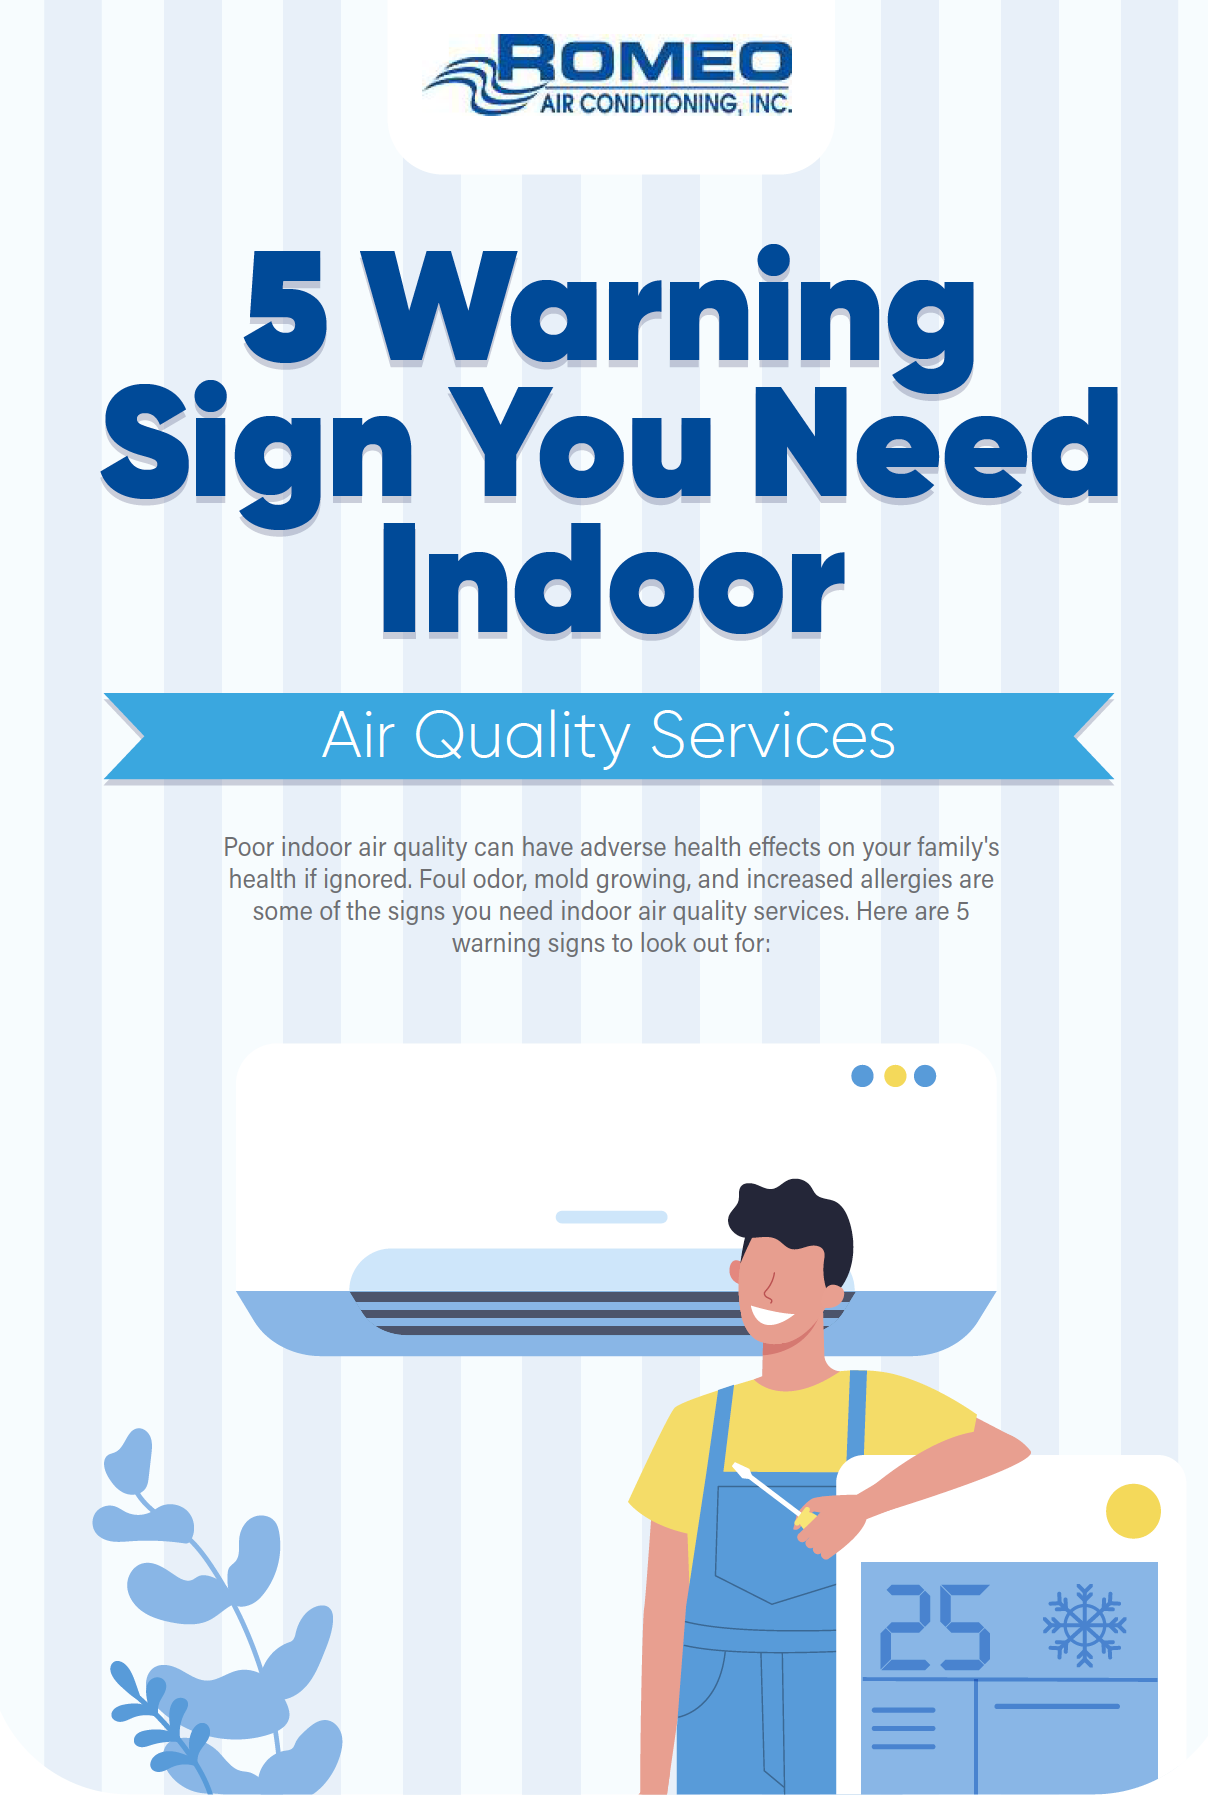 5 Signs You Need Indoor Air Quality Services